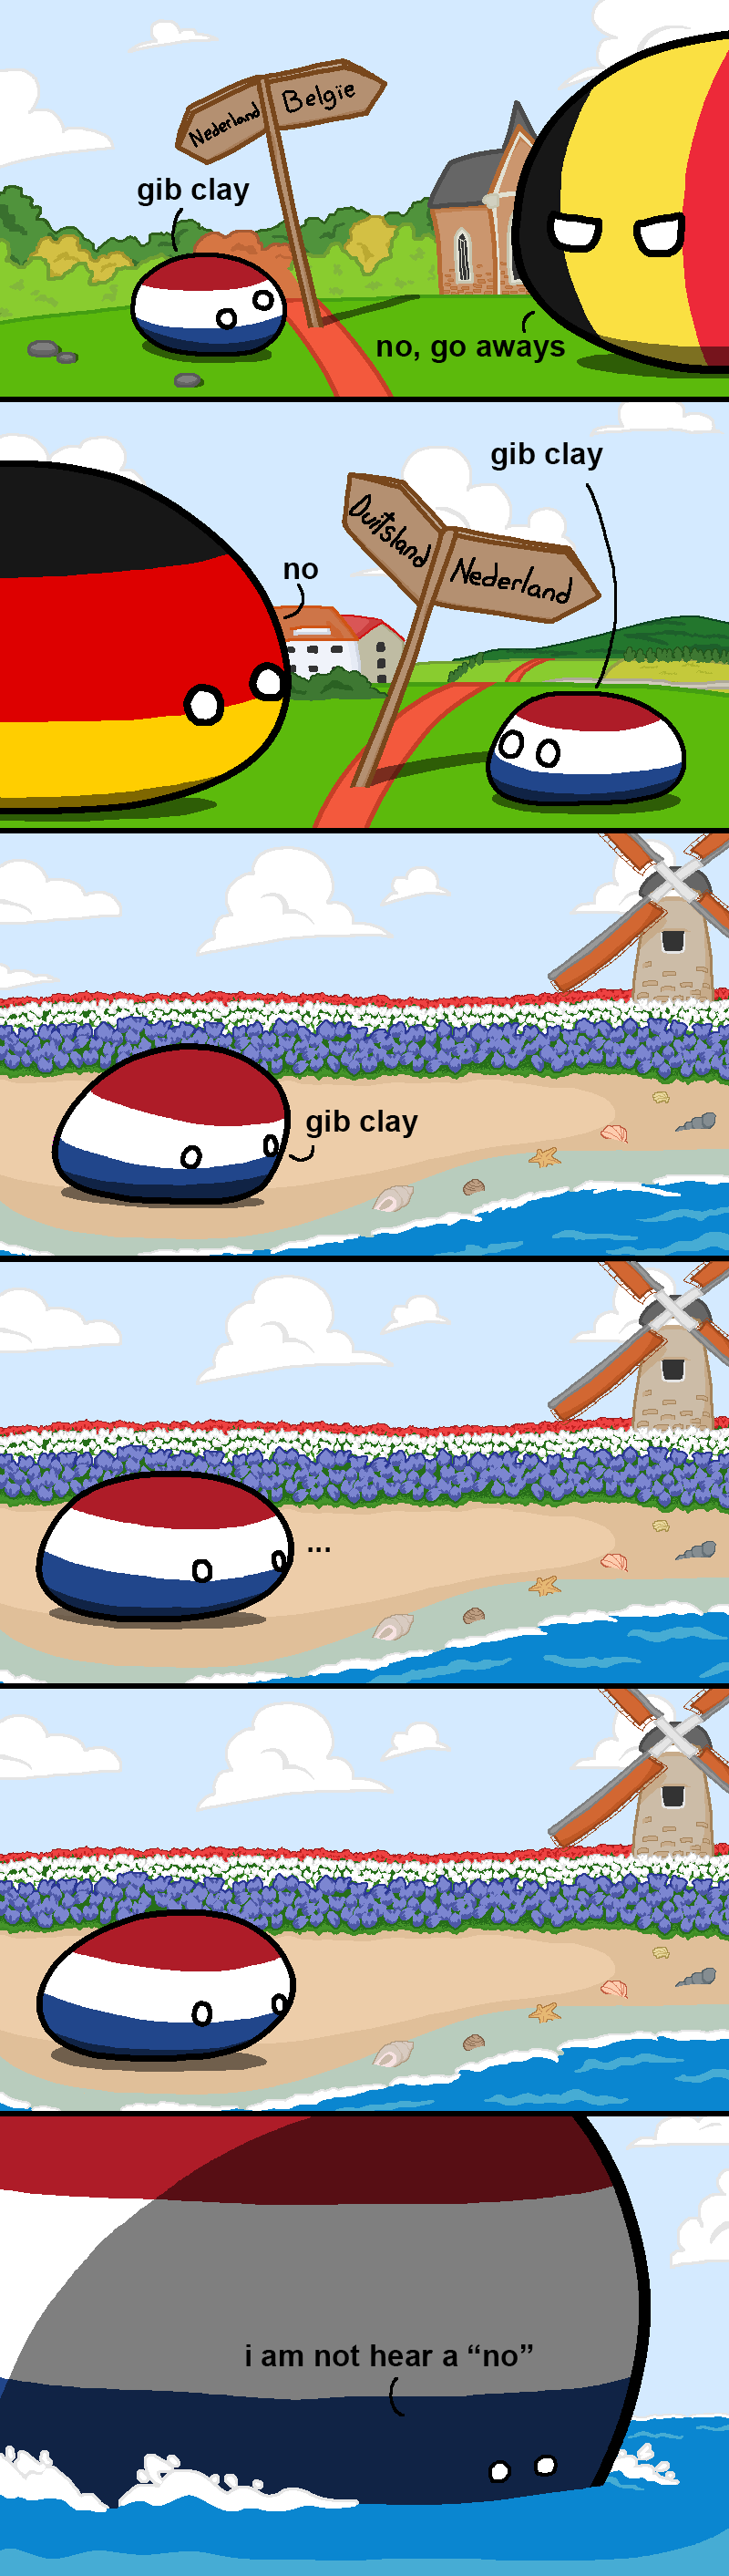 Countryballs, the Dutch are asking their neighbors for clay. All saying no in disgust. When Dutch ball goes to the sea, there is no objection. Dutch ball claims clay. I would say it should be 'geef' instead of 'gib', but who am I to judge.